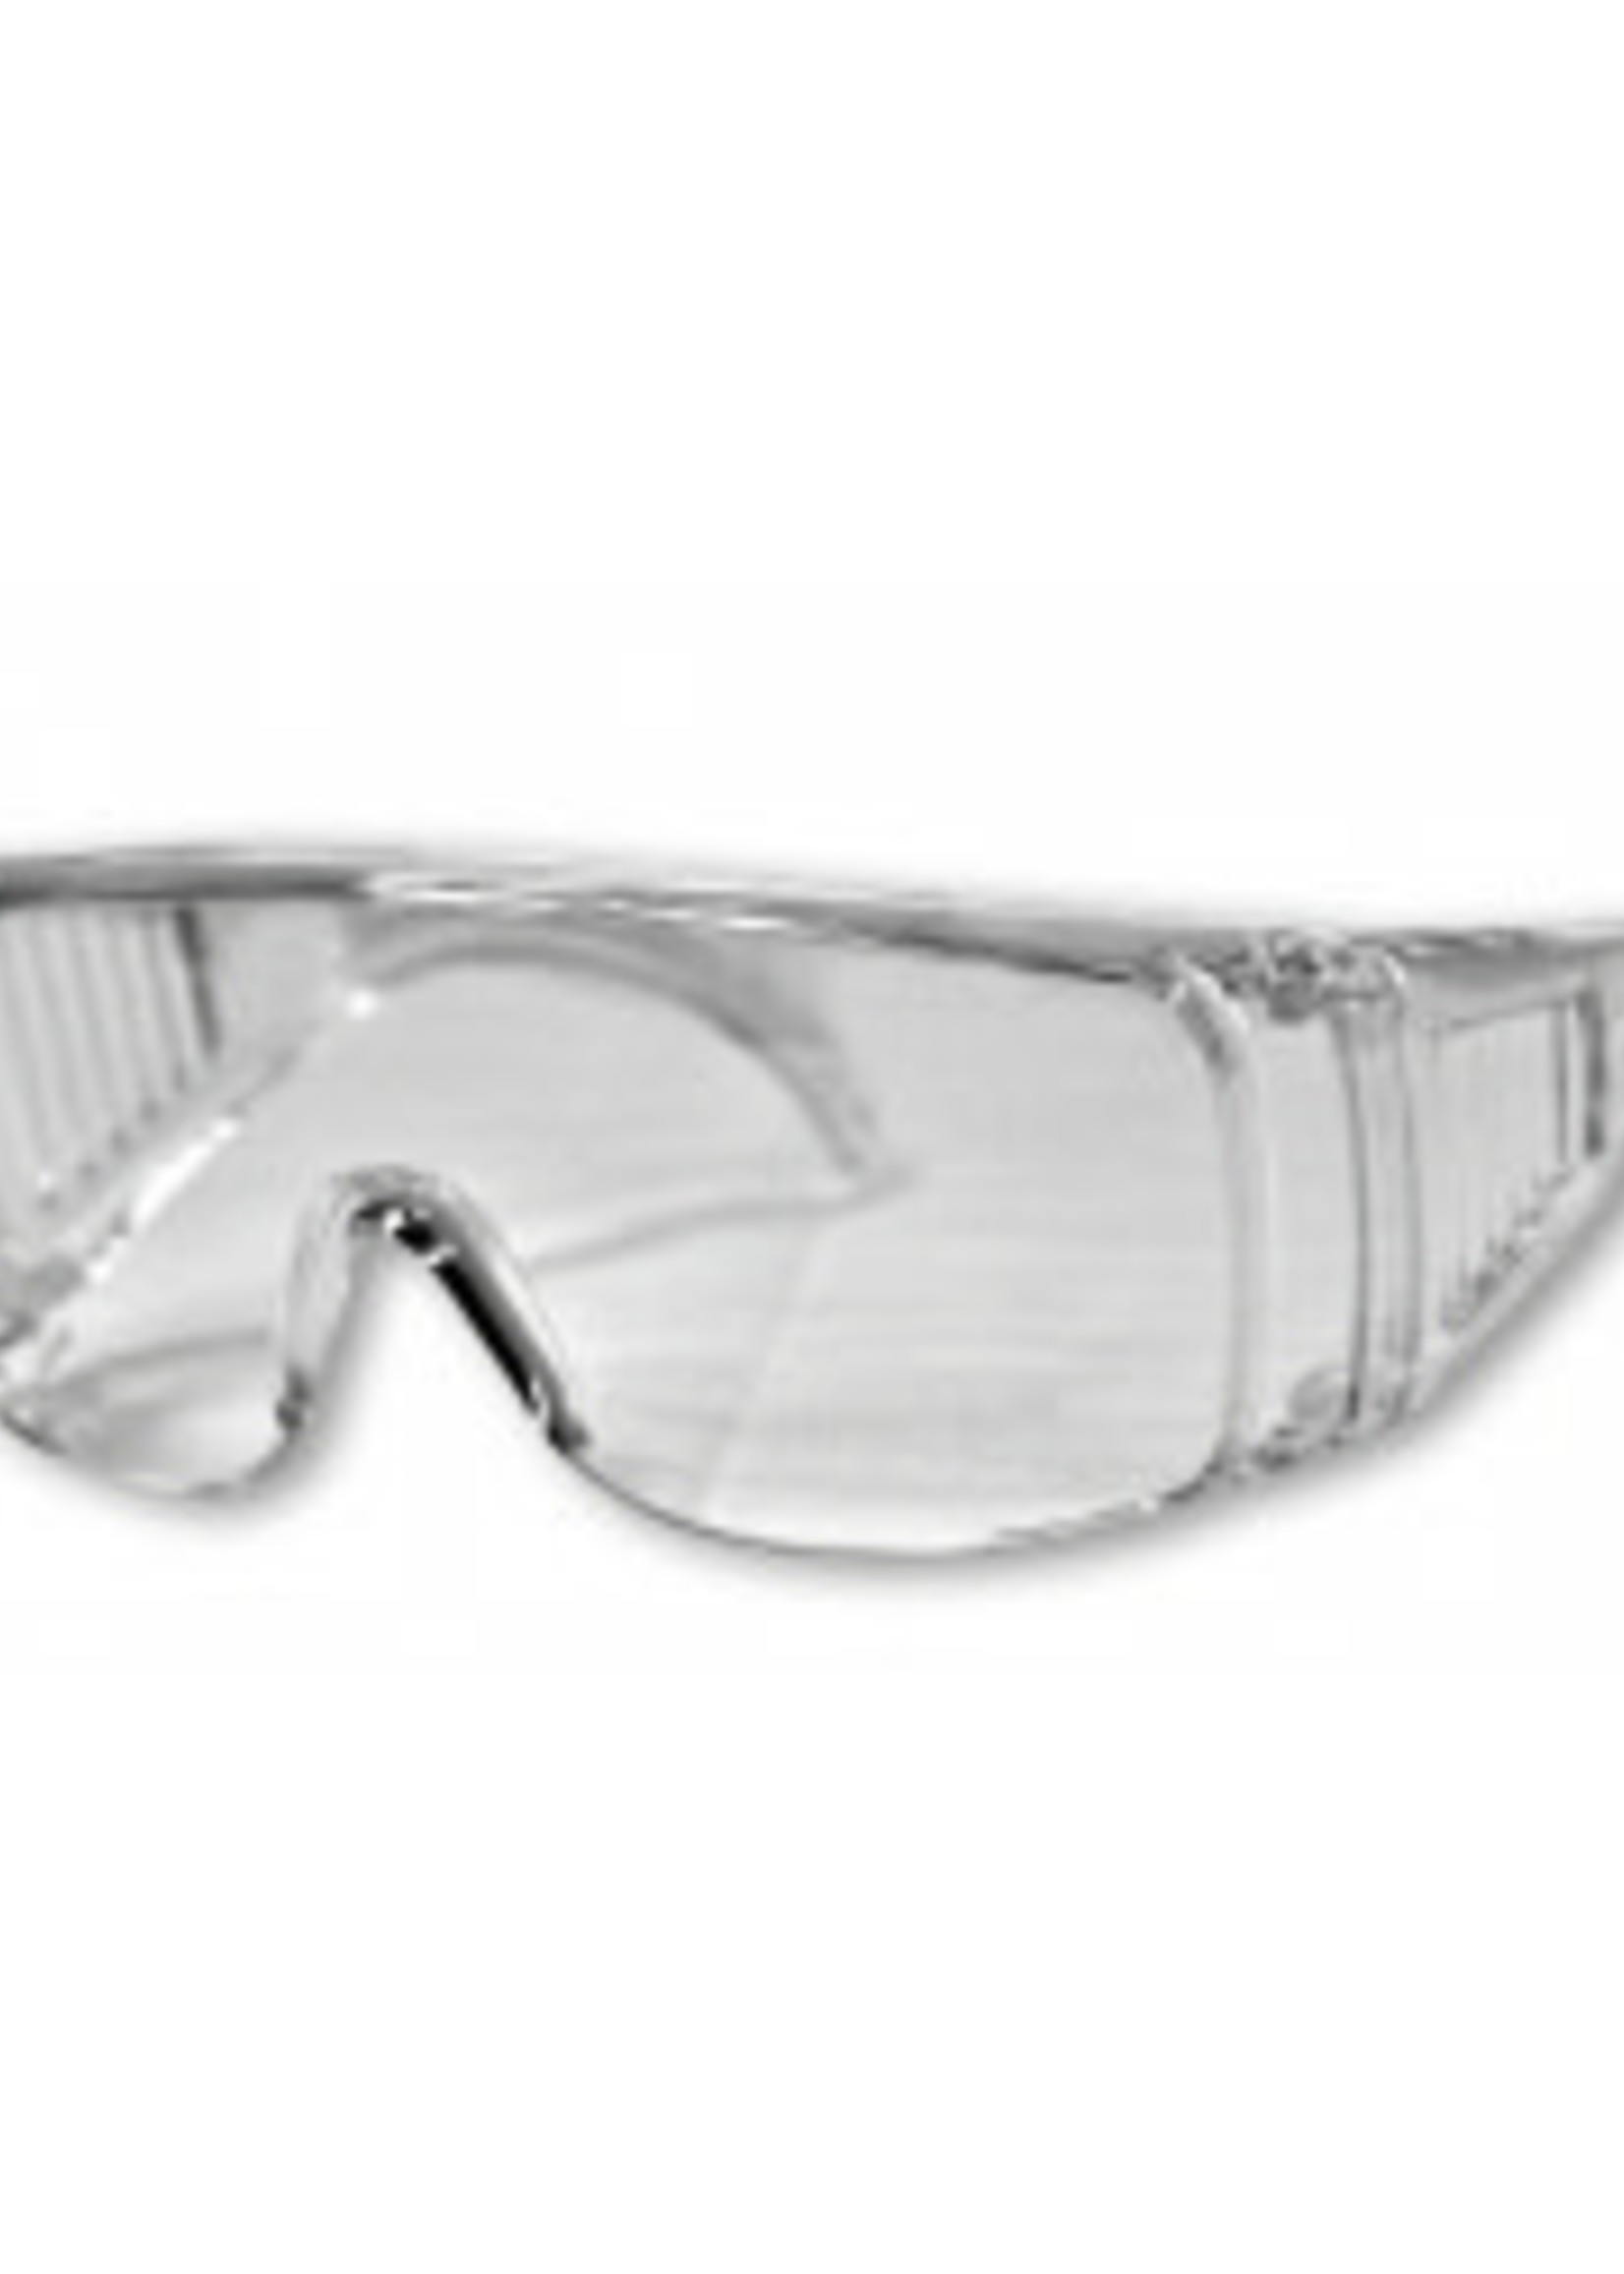 Vitrex Vitrex Safety Spectacles clear frame